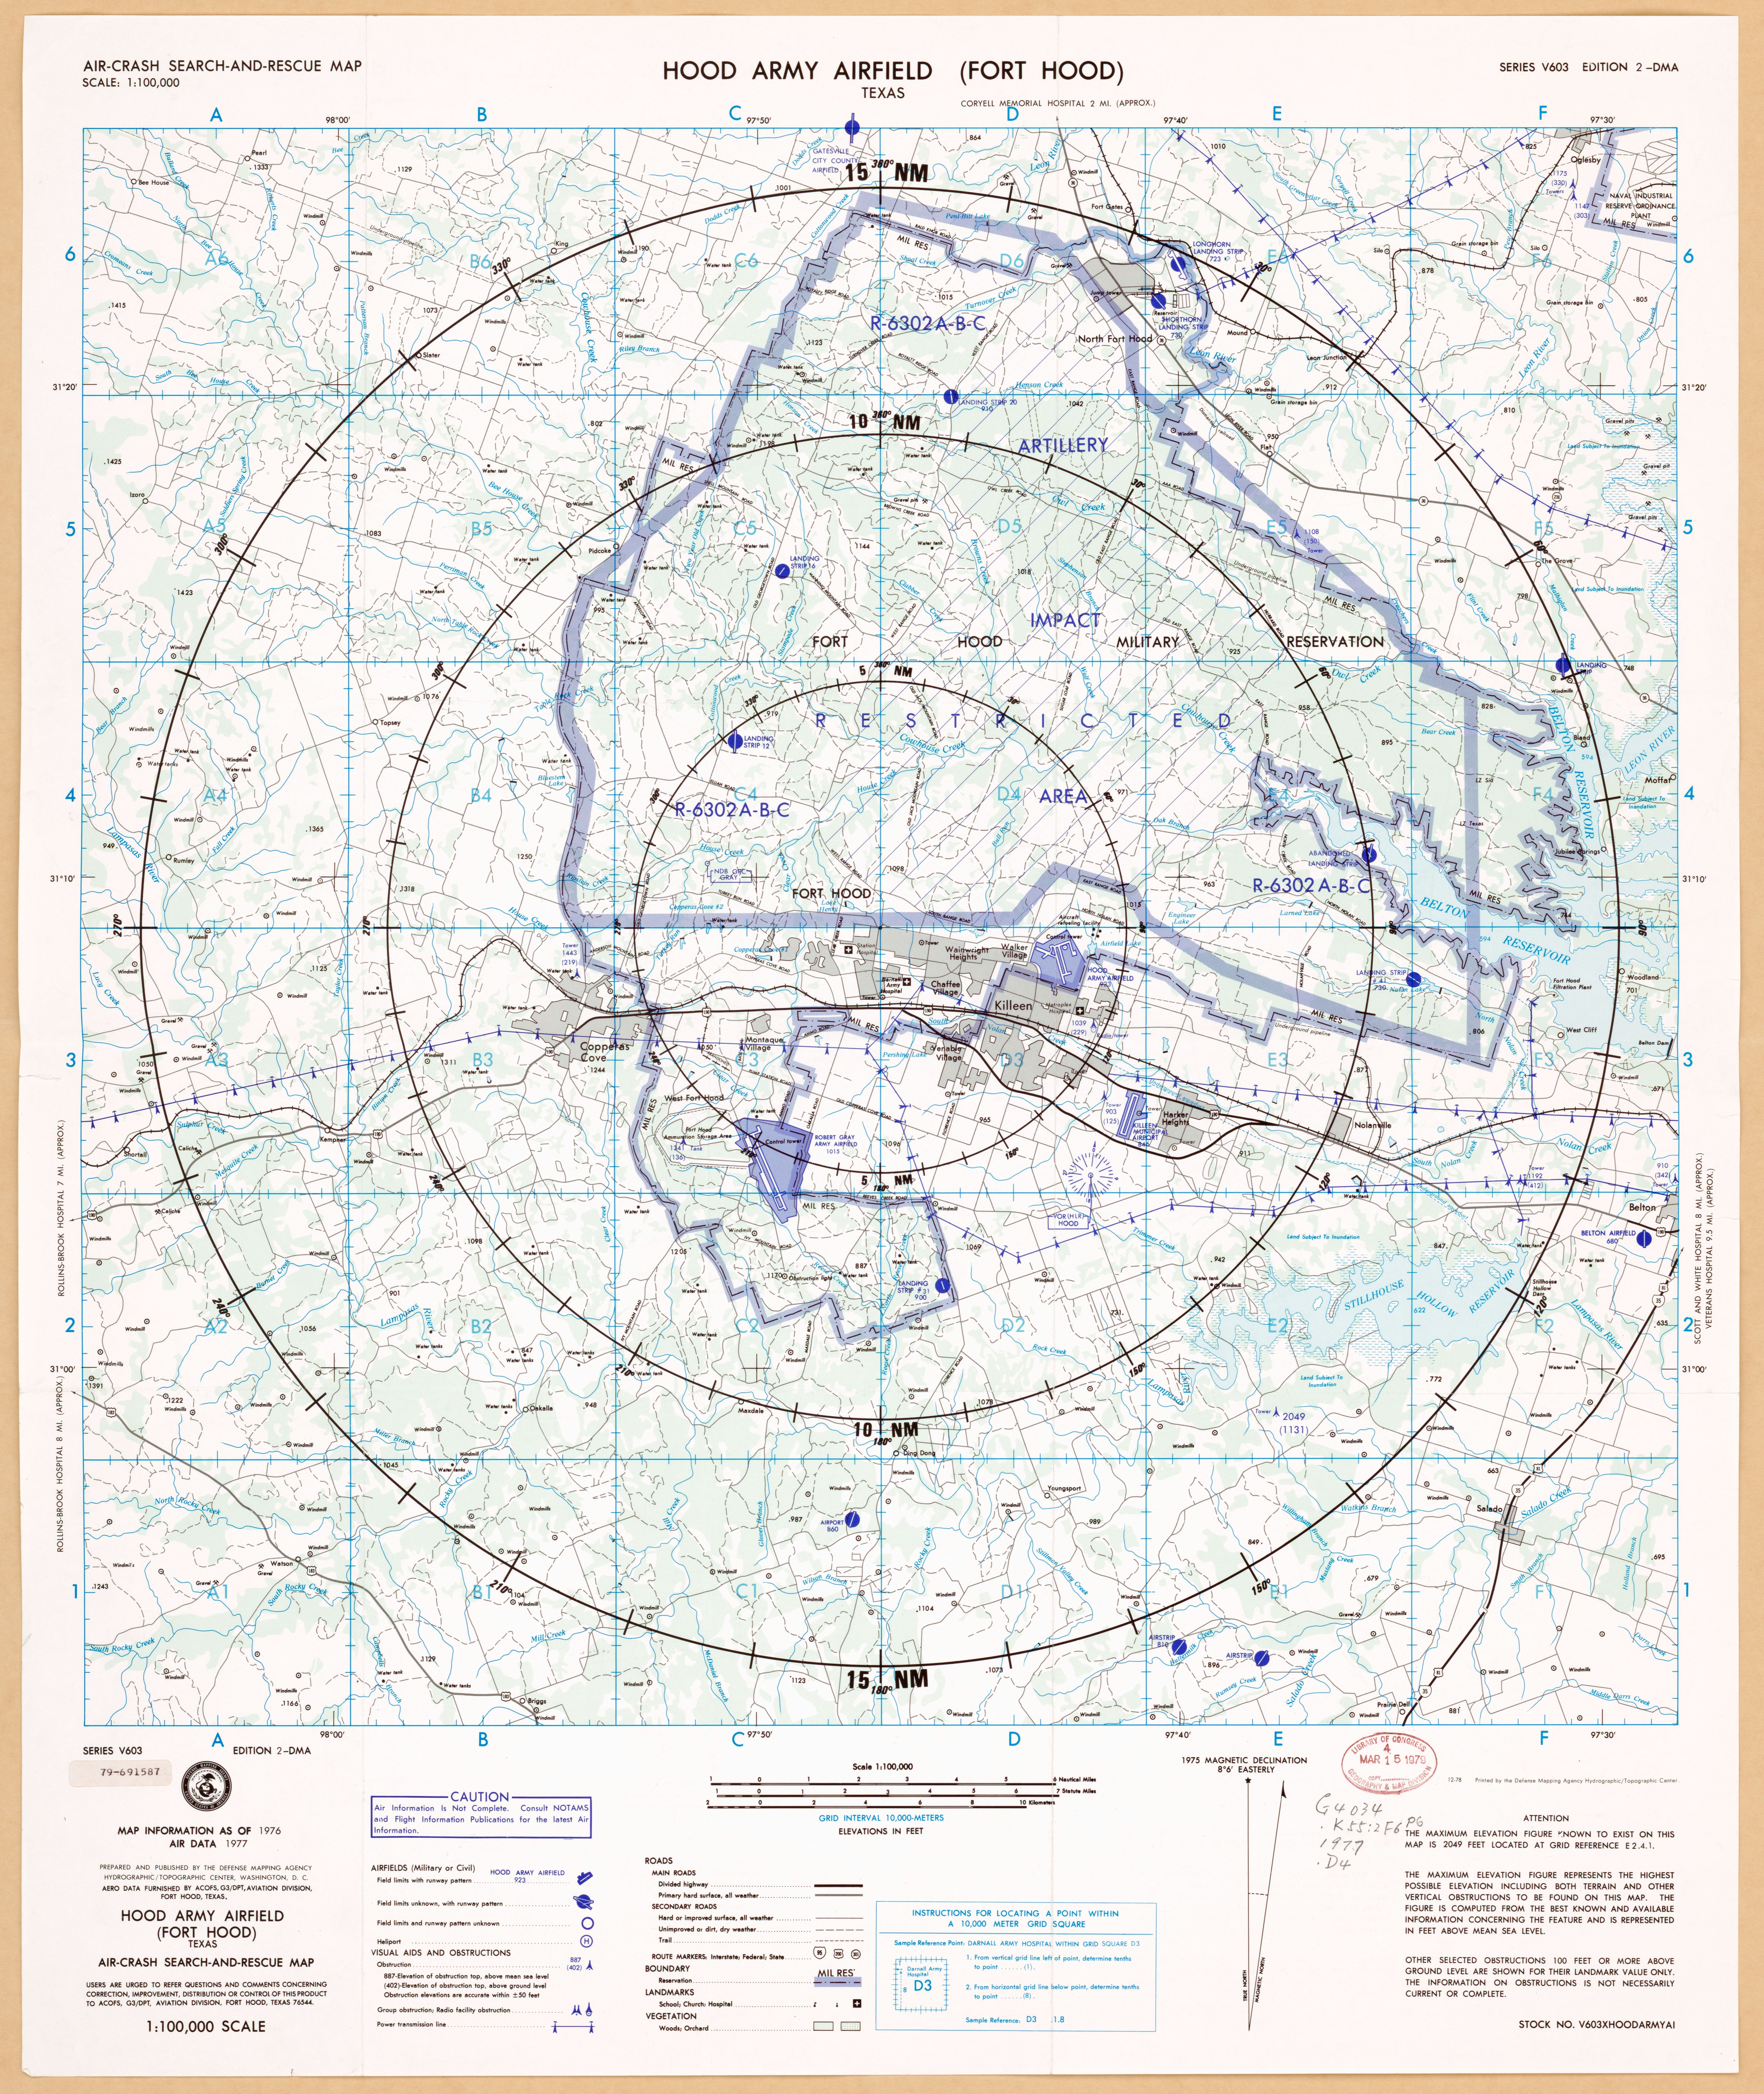 File:Air-crash search-and-rescue map. Hood Army Airfield (Fort Hood), Texas LOC 79691587.jpg - Wikimedia Commons